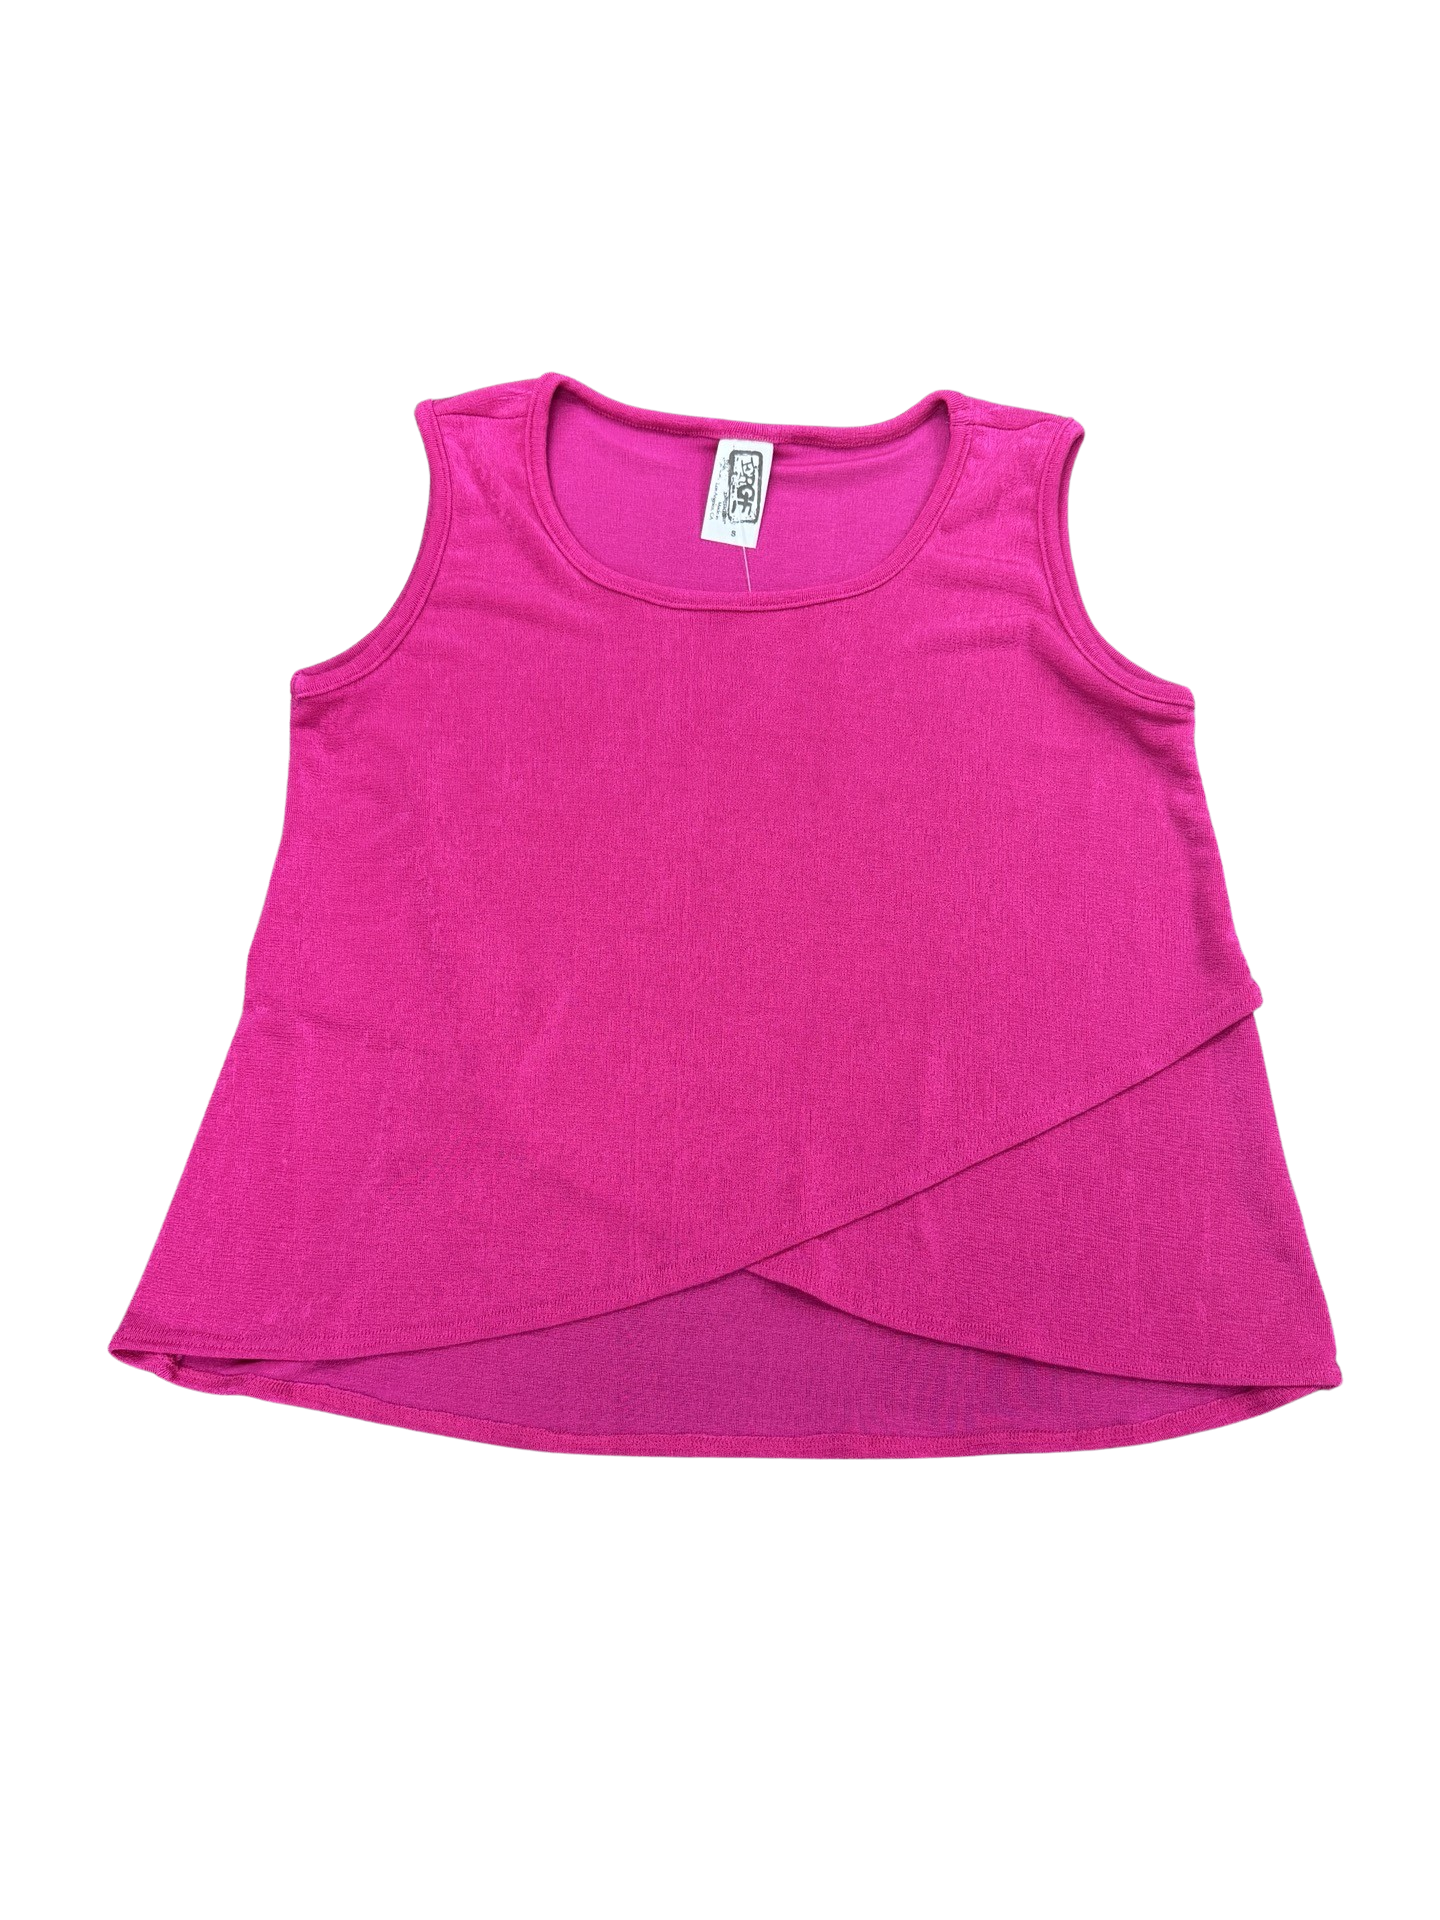 Girls- Erge Solid Slinky Layer Bottom Tank and Short Set